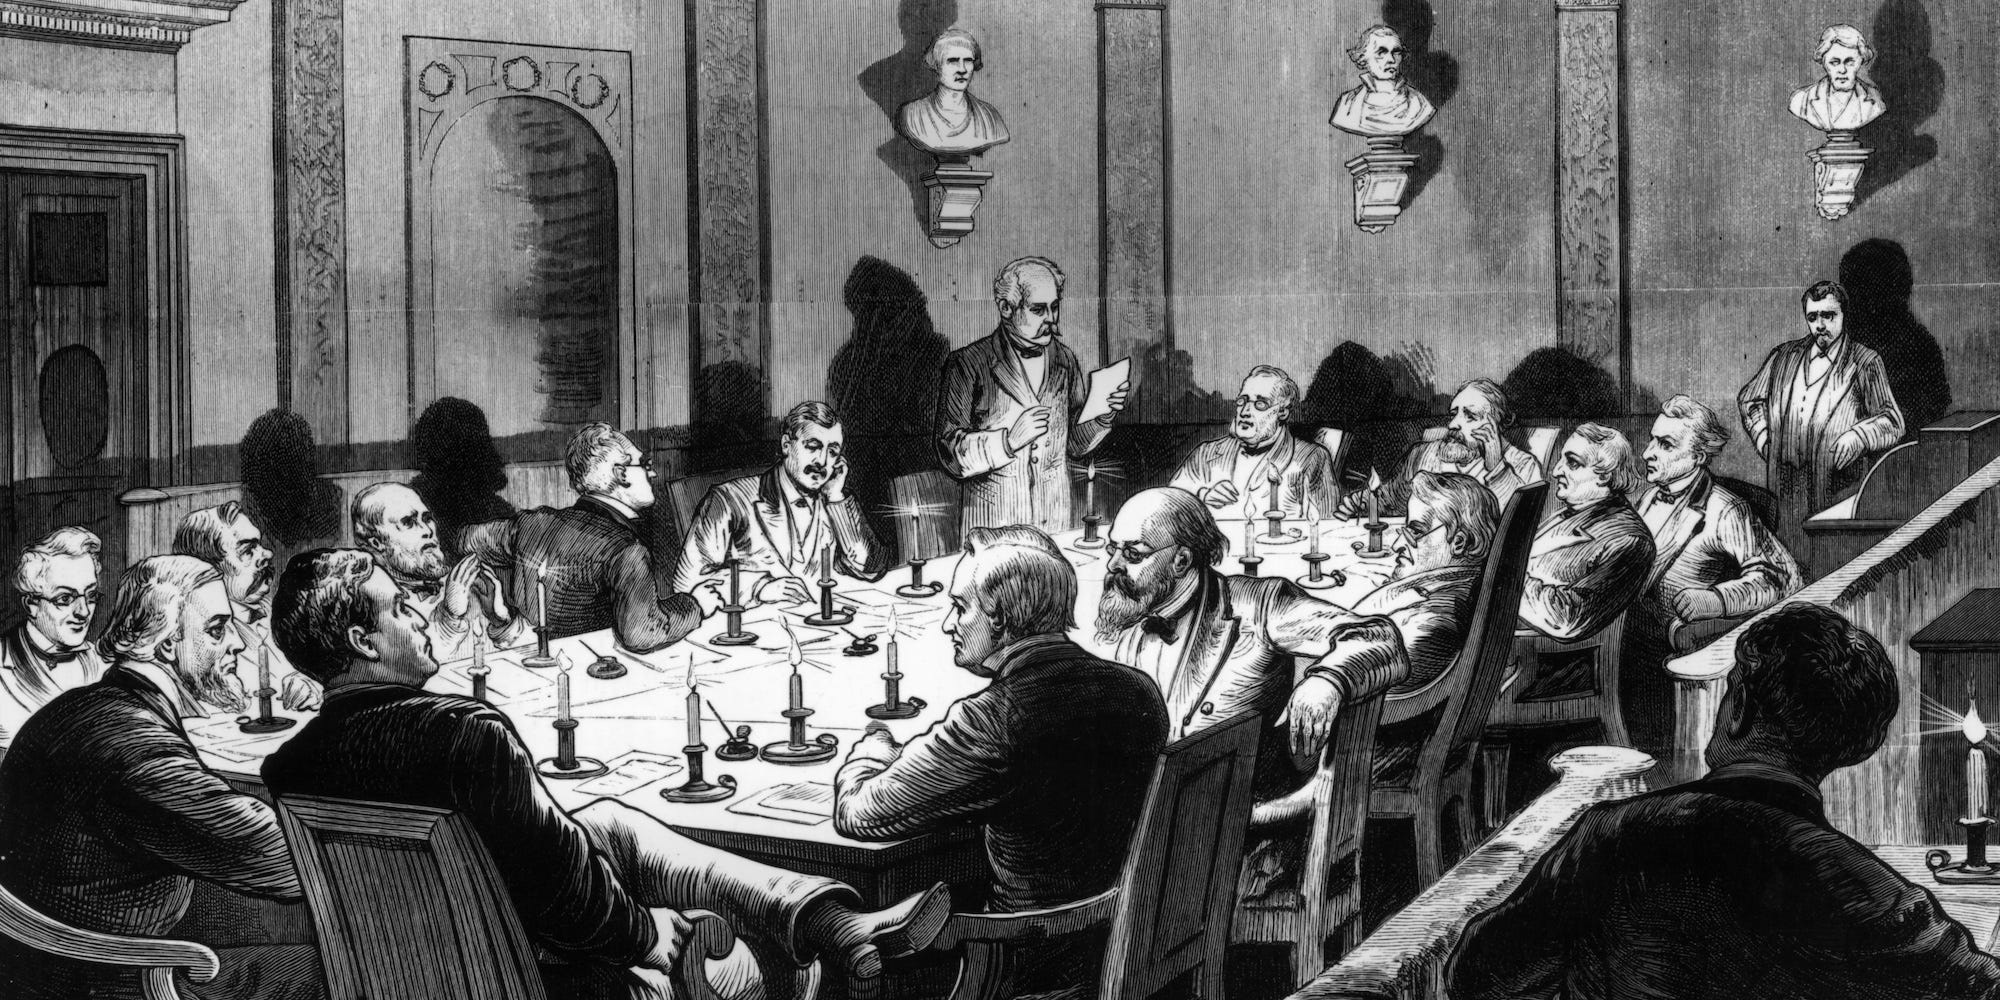 The Electoral Commission of 1877 holds a secret session by candlelight in Washington, DC. The commission was set up to decide the result of the controversial presidential election between Rutherford B Hayes and Samuel J Tilden, and resulted in the 22 contested votes from Florida, Louisiana, Oregon and South Carolina being eventually awarded to Hayes.